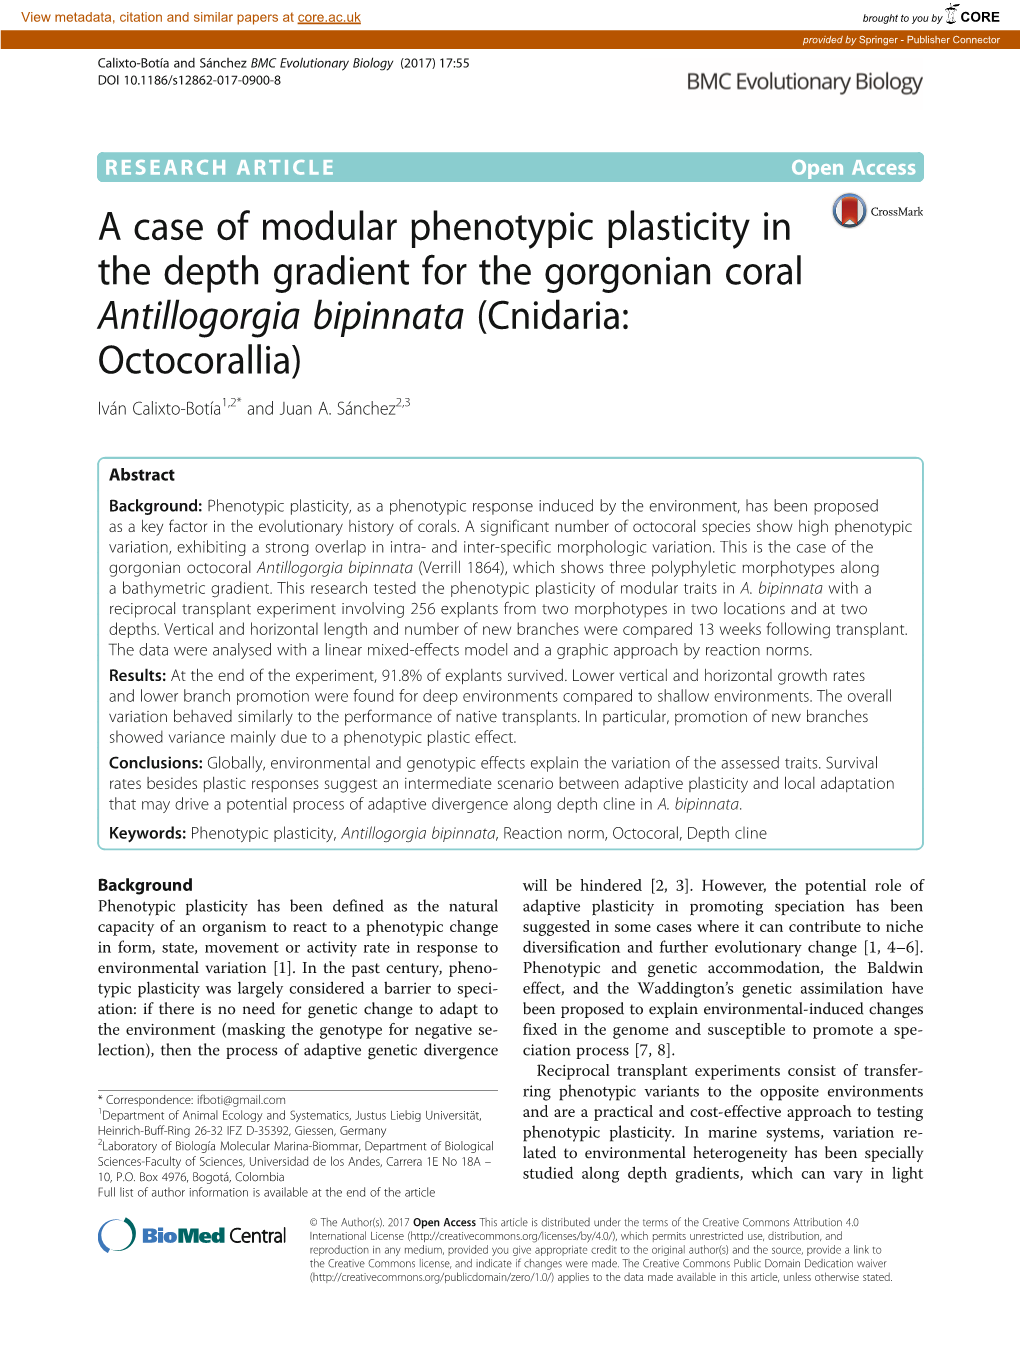 A Case of Modular Phenotypic Plasticity in the Depth